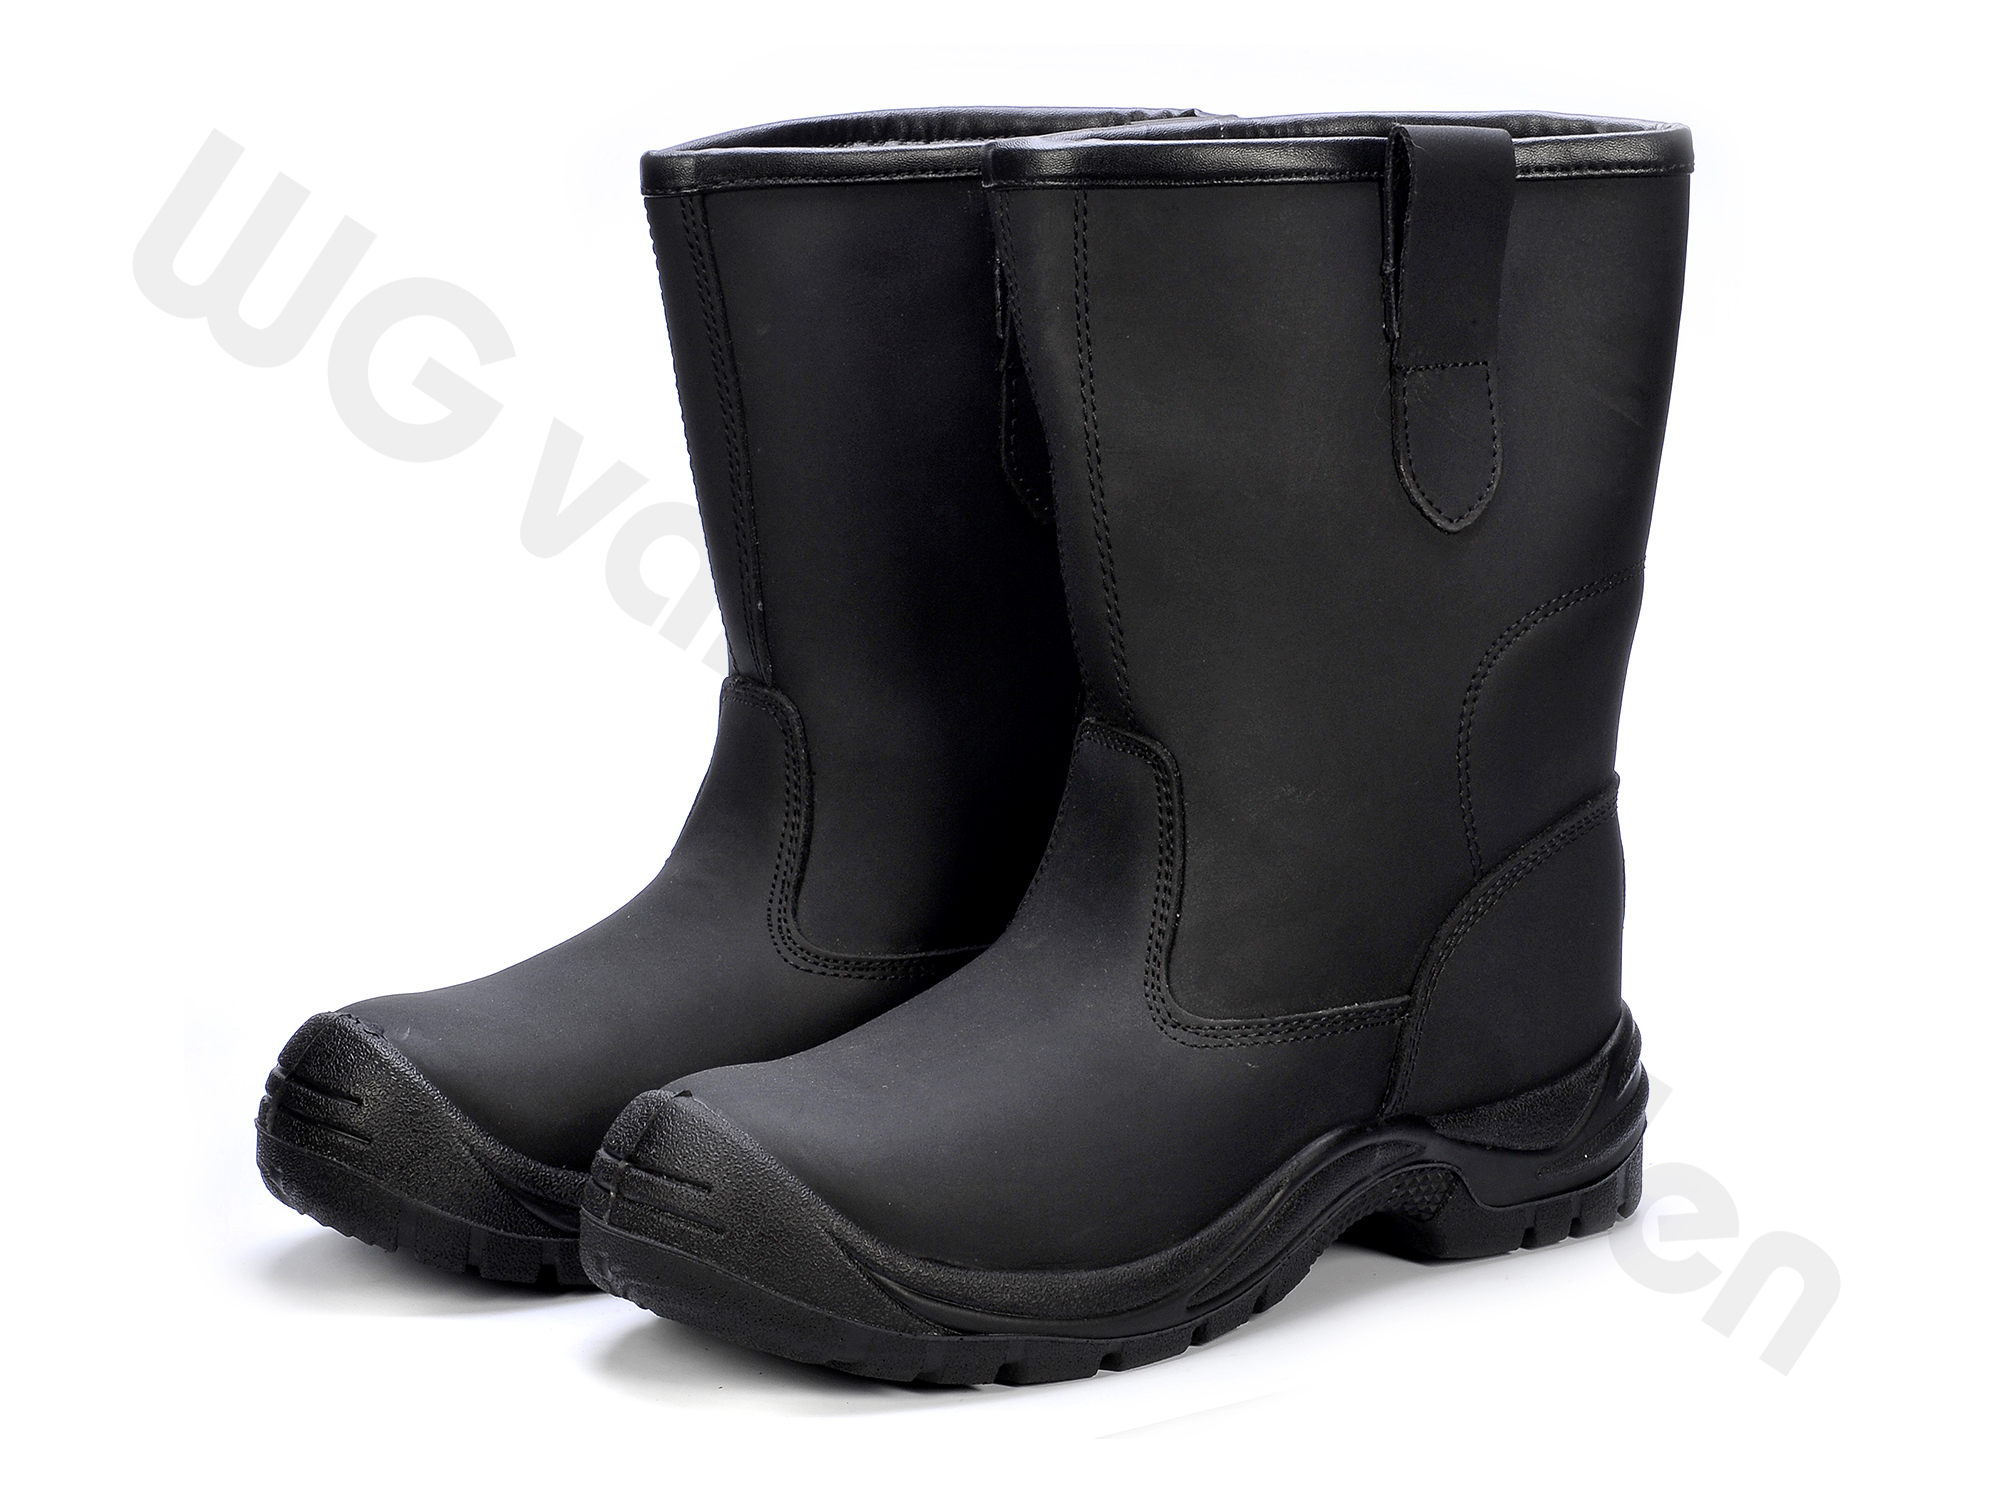 880355 BOOTS SAFETY S3 LEATHER W/STEEL TOE AND LINING 44/28CM